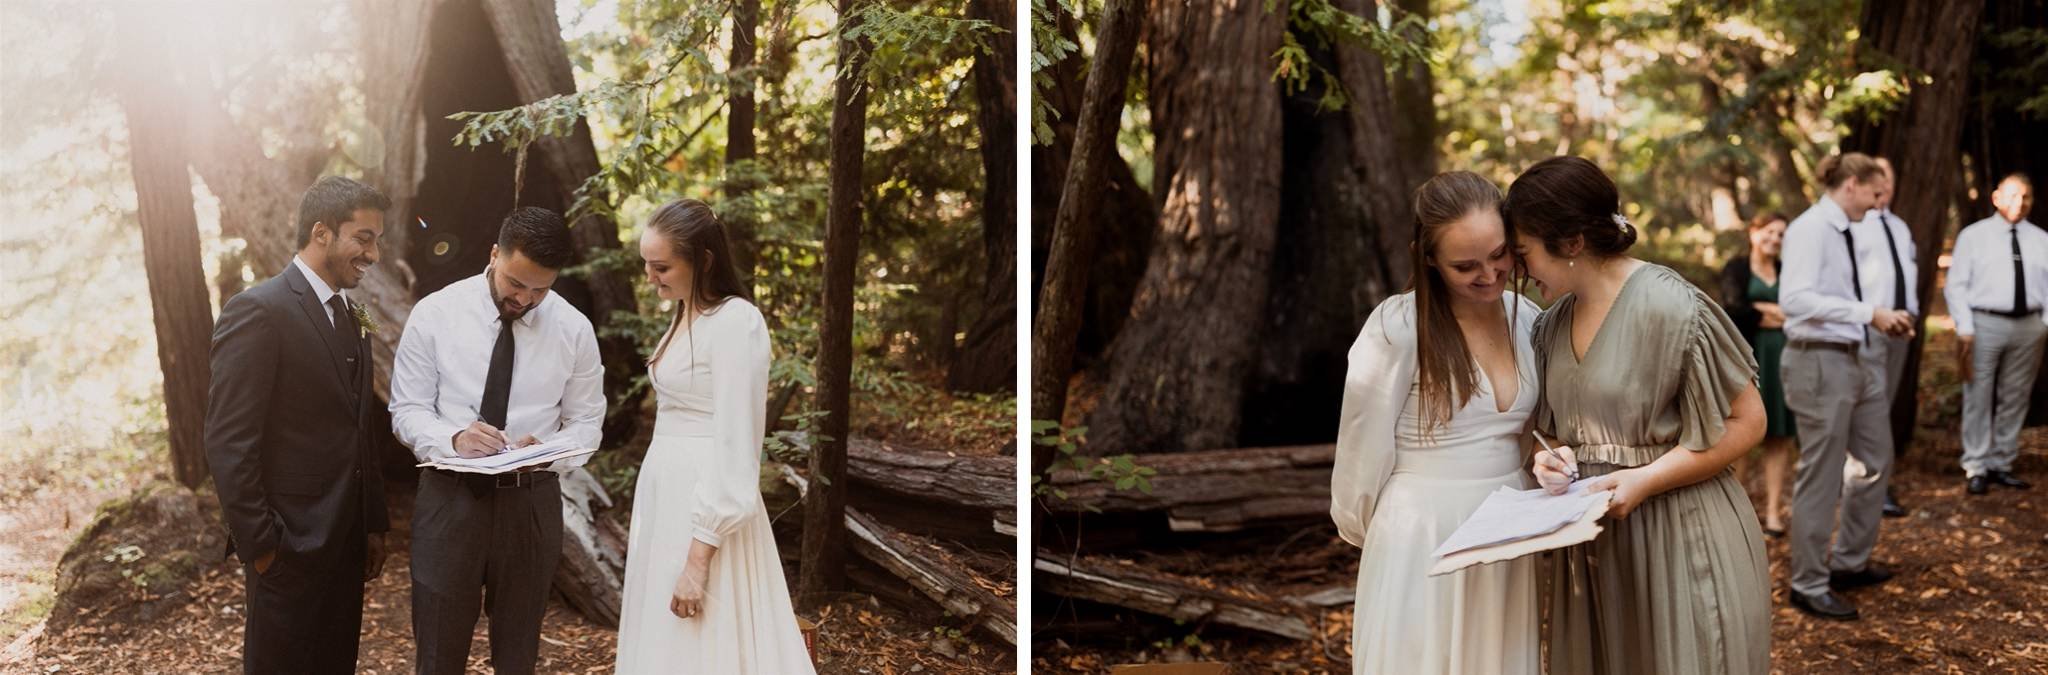 063_Two-Day Big Sur Redwoods Elopement with Family_Will Khoury Elopement Photographer.jpg